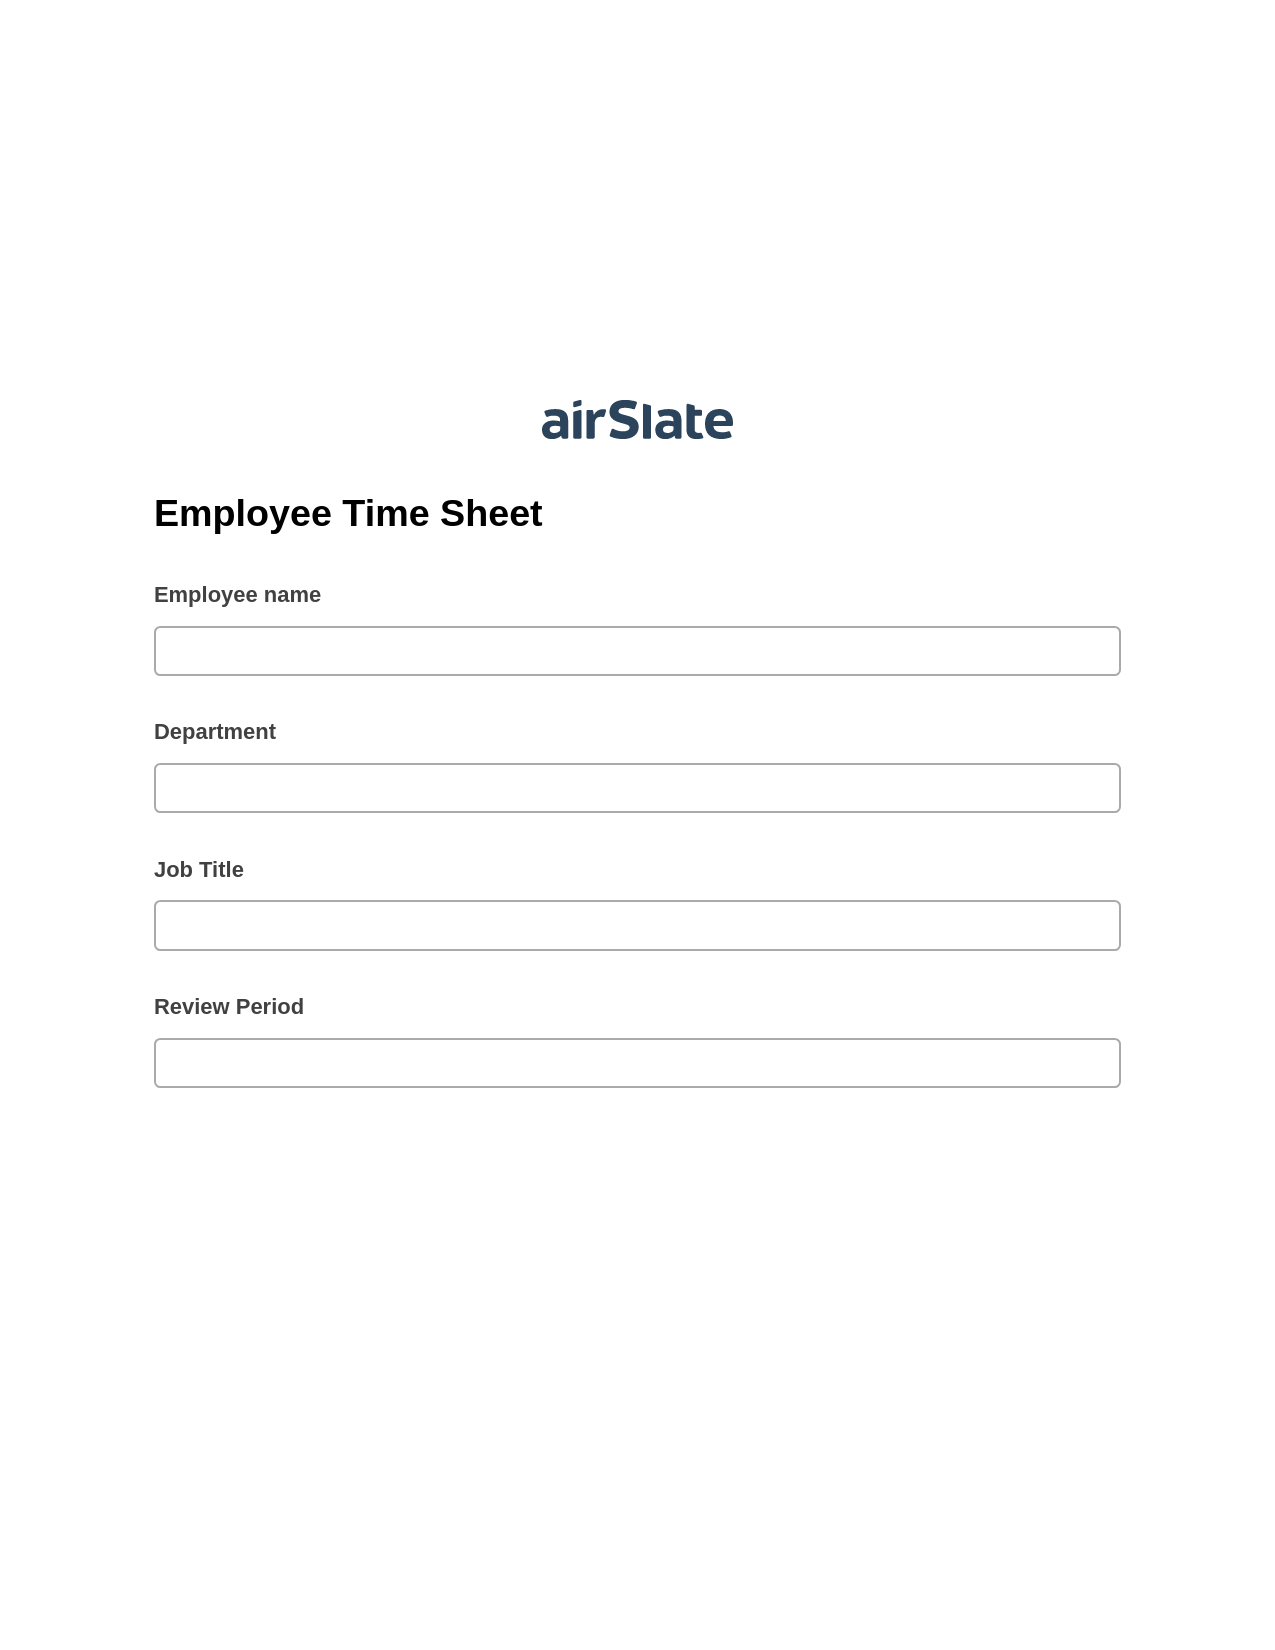 Multirole Employee Time Sheet Pre-fill from another Slate Bot, Create slate bot, Export to NetSuite Bot